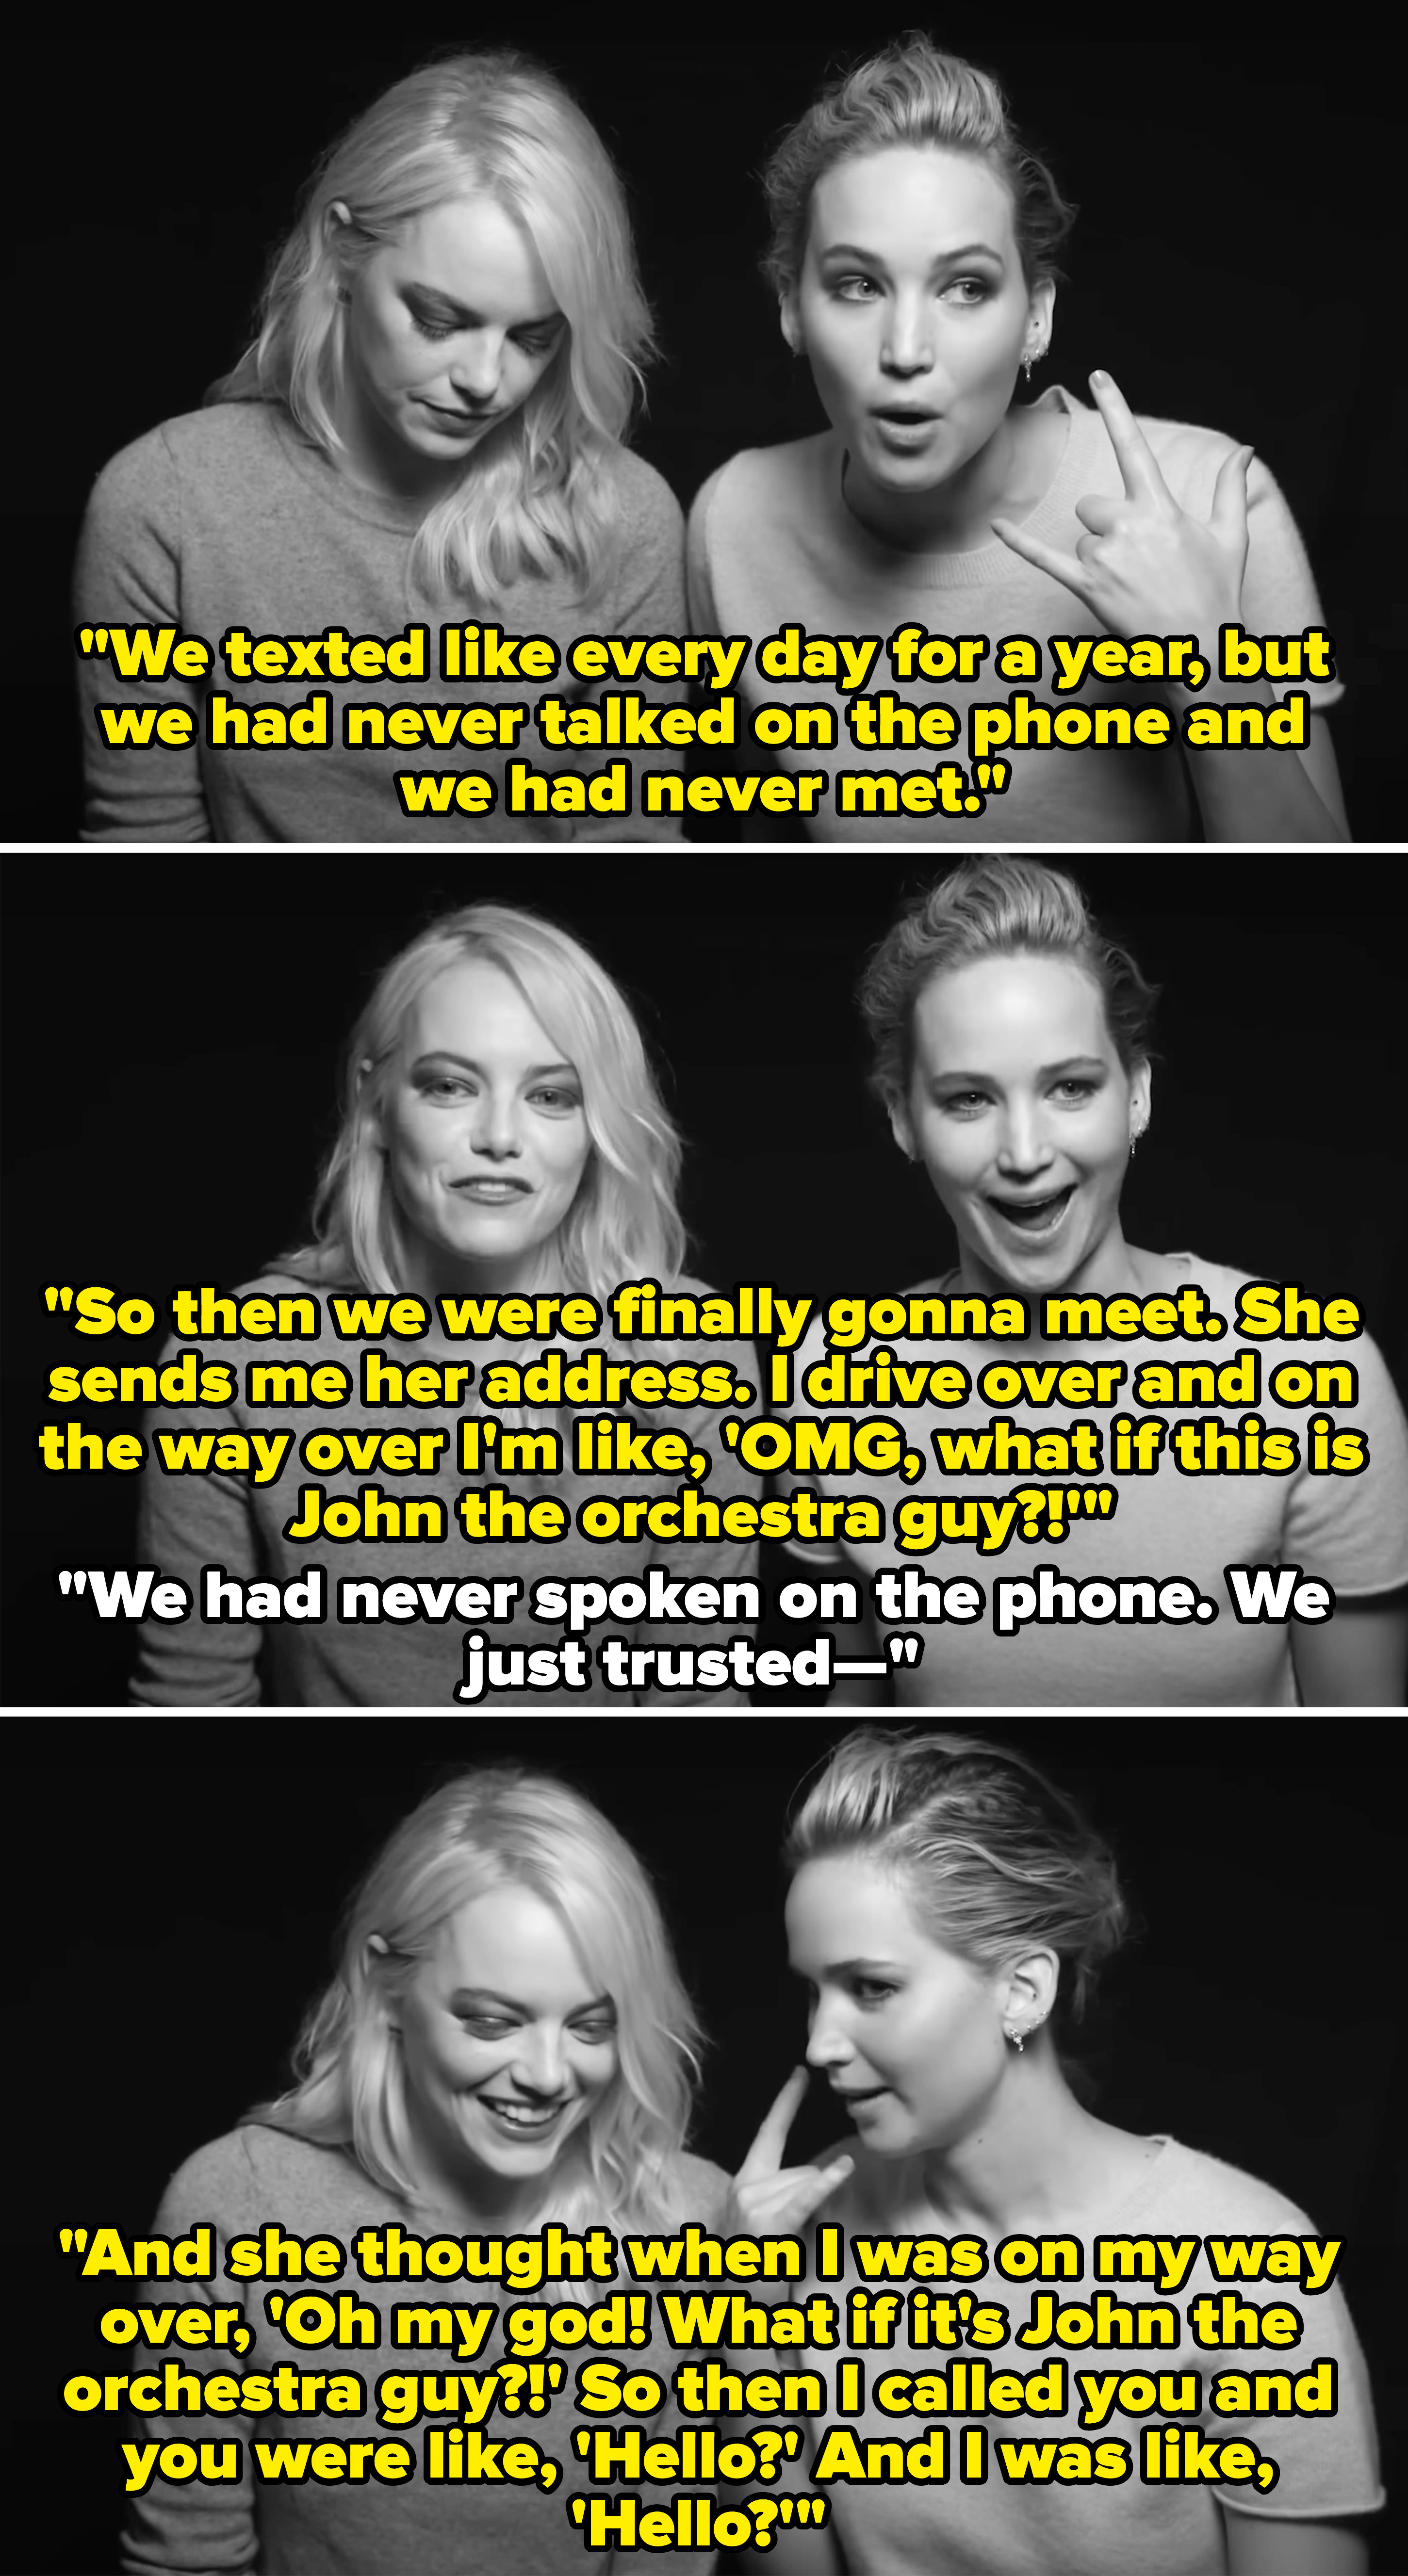 Emma Stone and Jennifer Lawrence being interviewed together